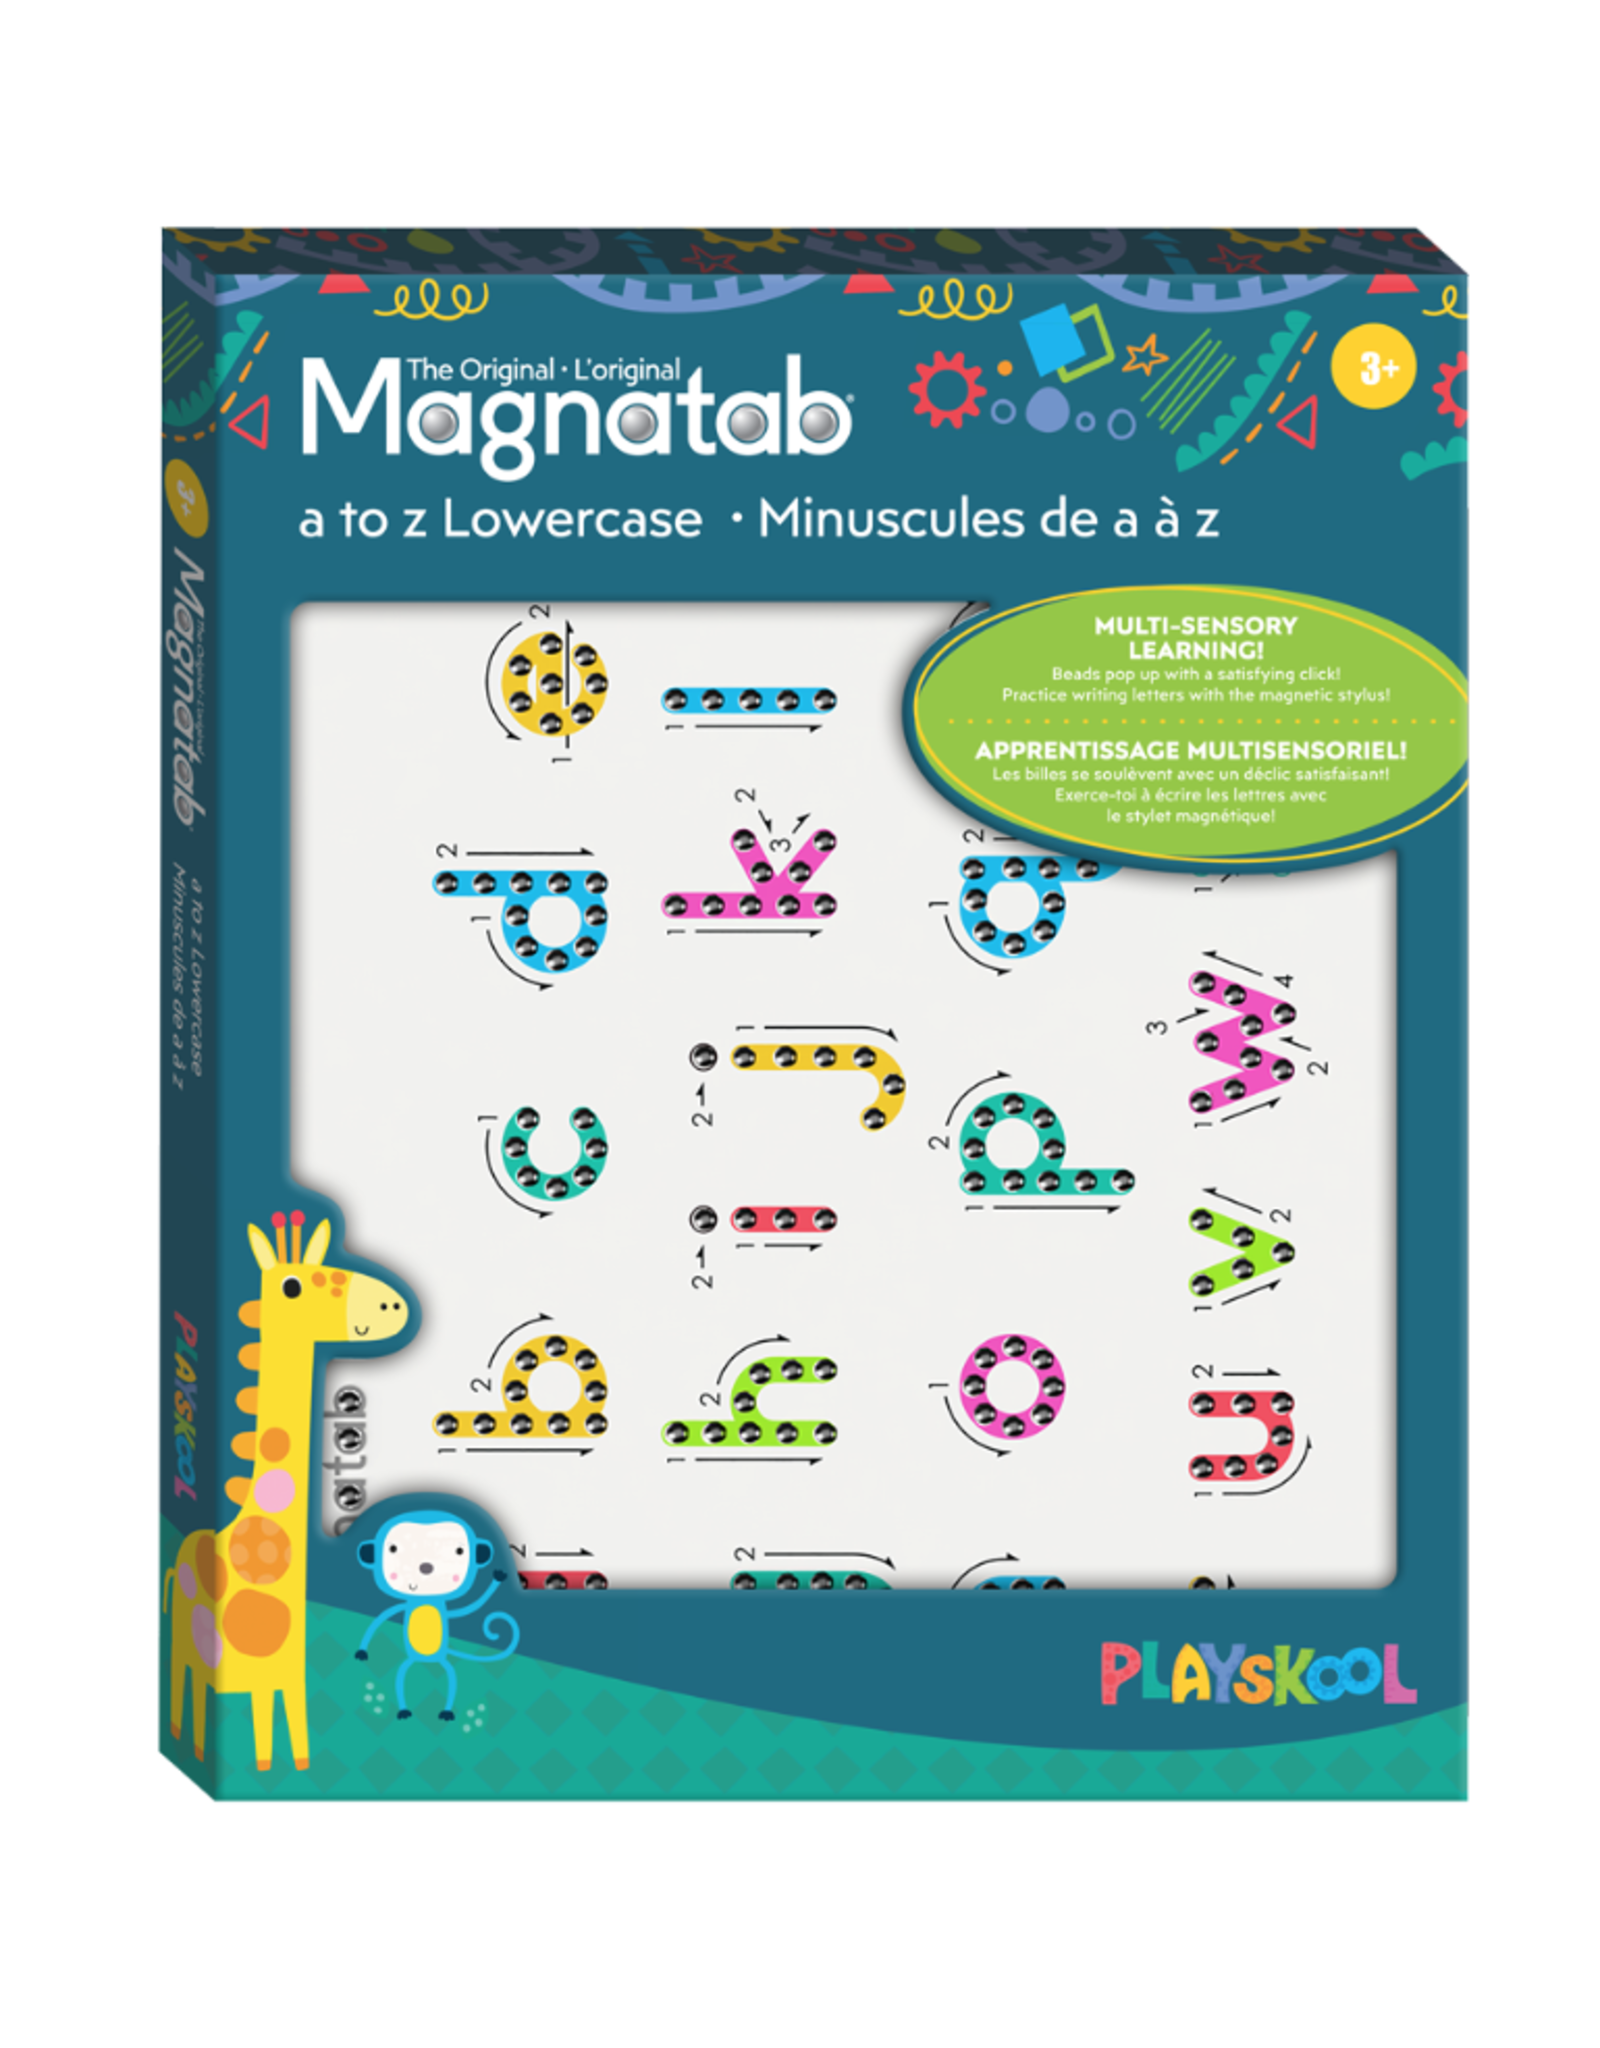 Play Monster Playskool - Magnatab A to Z Lowercase